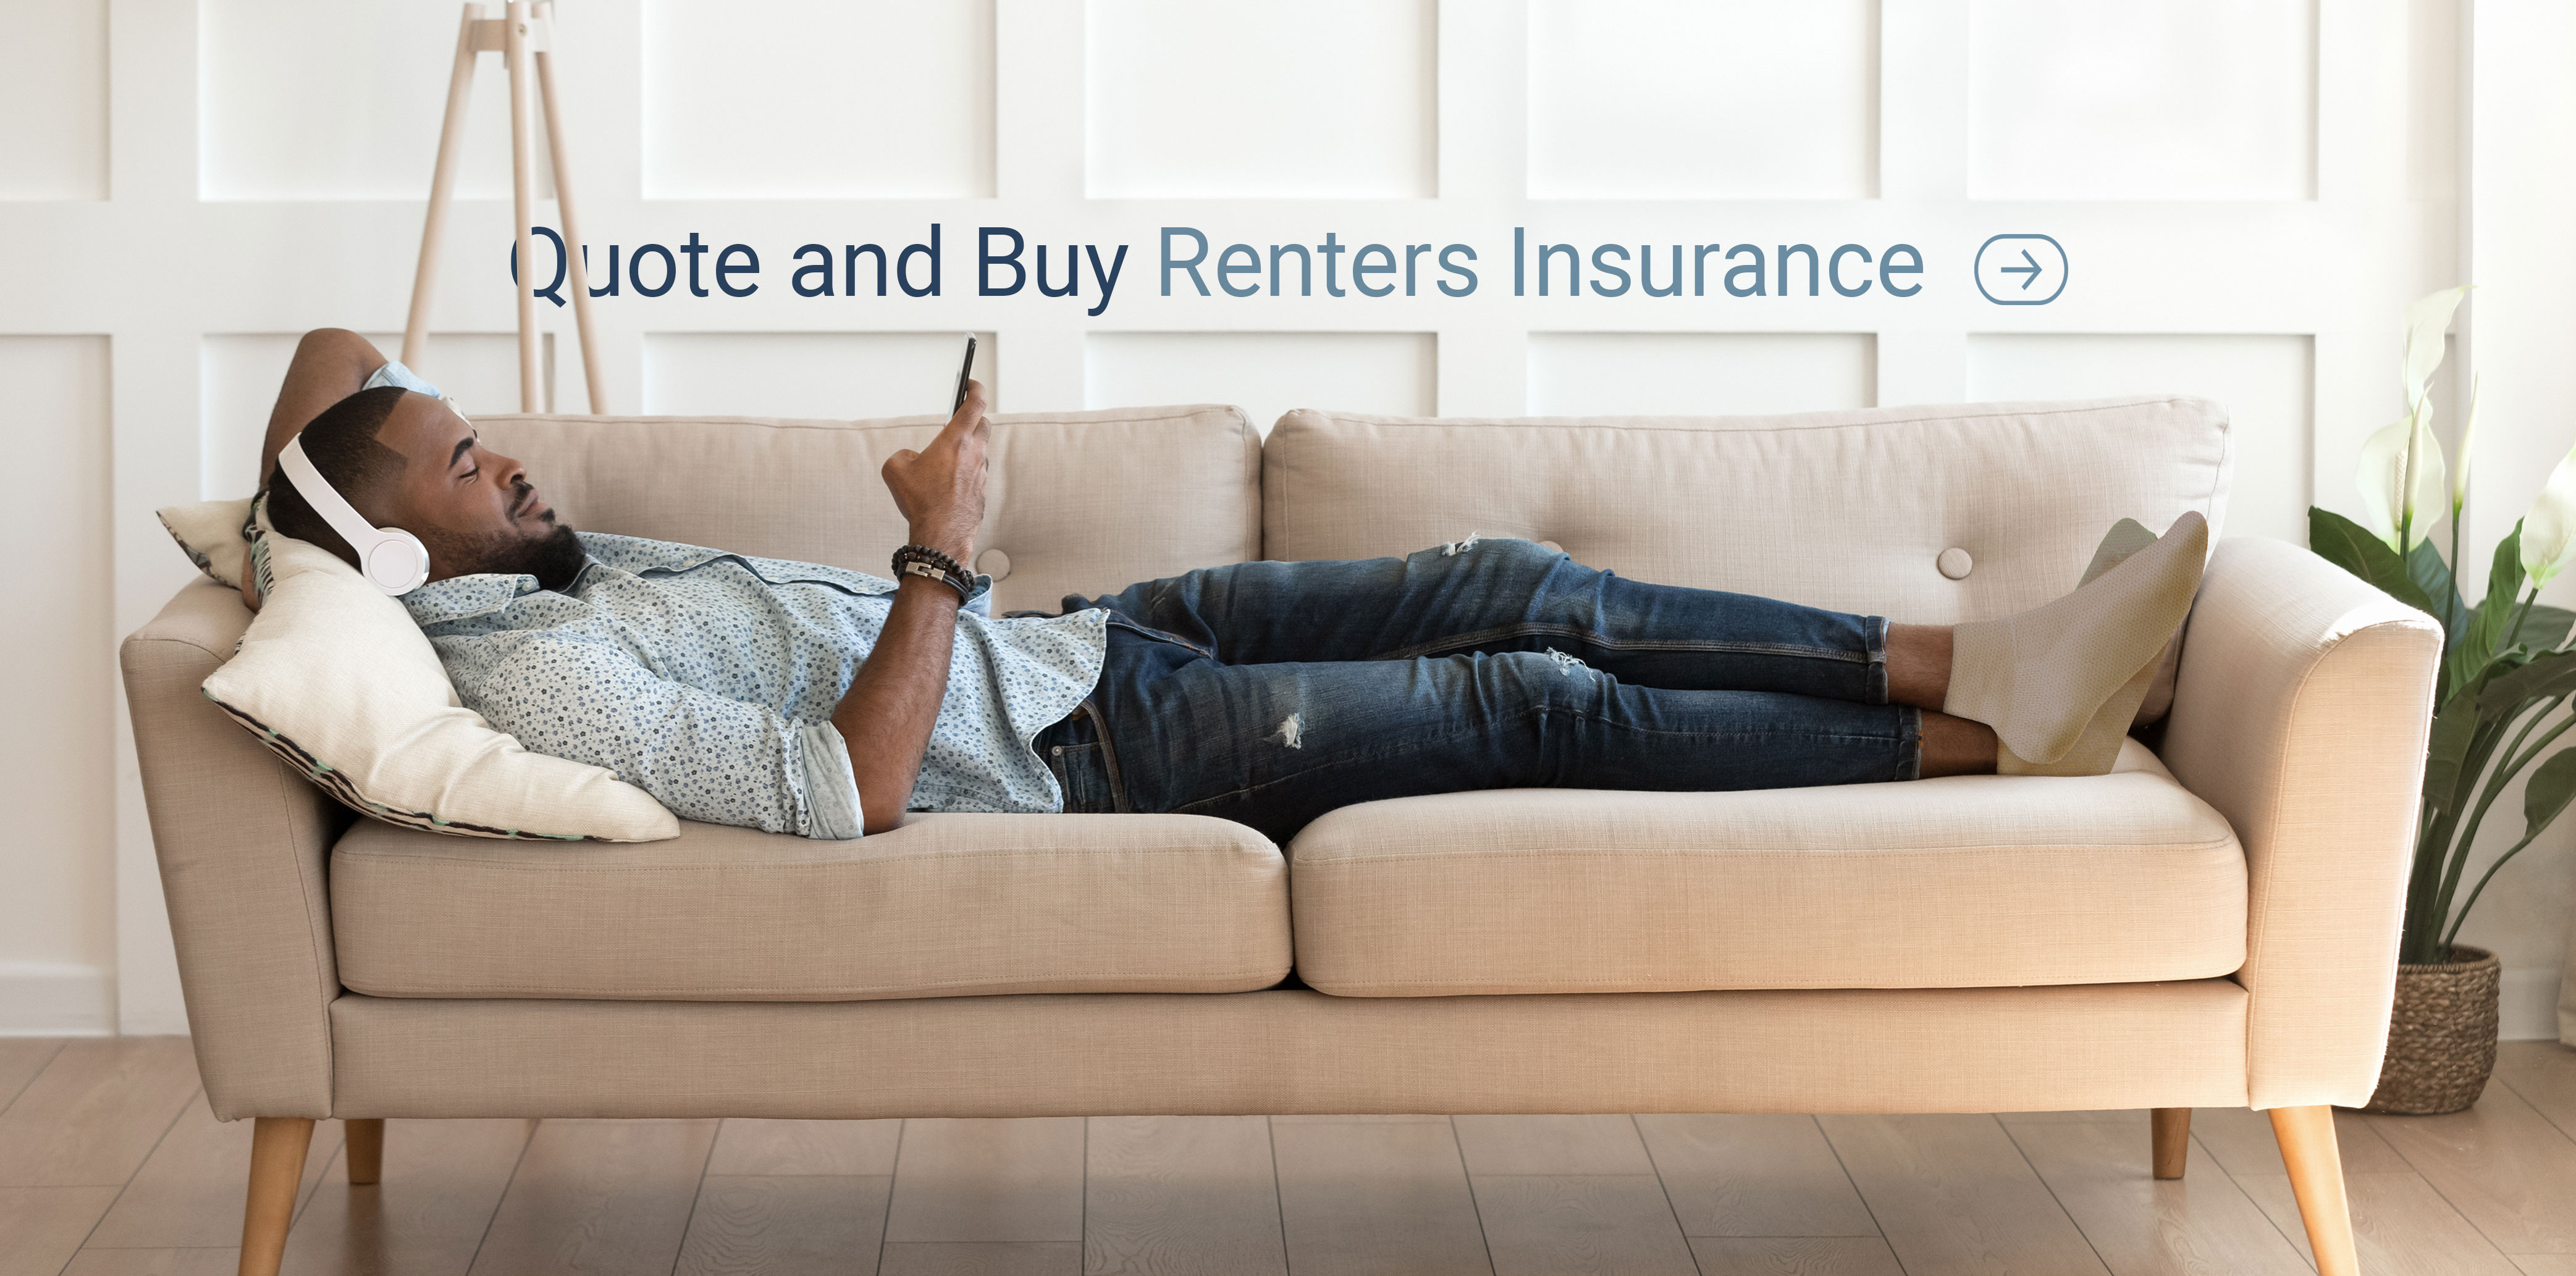 Click here to quote a Renters policy in under 5 minutes!